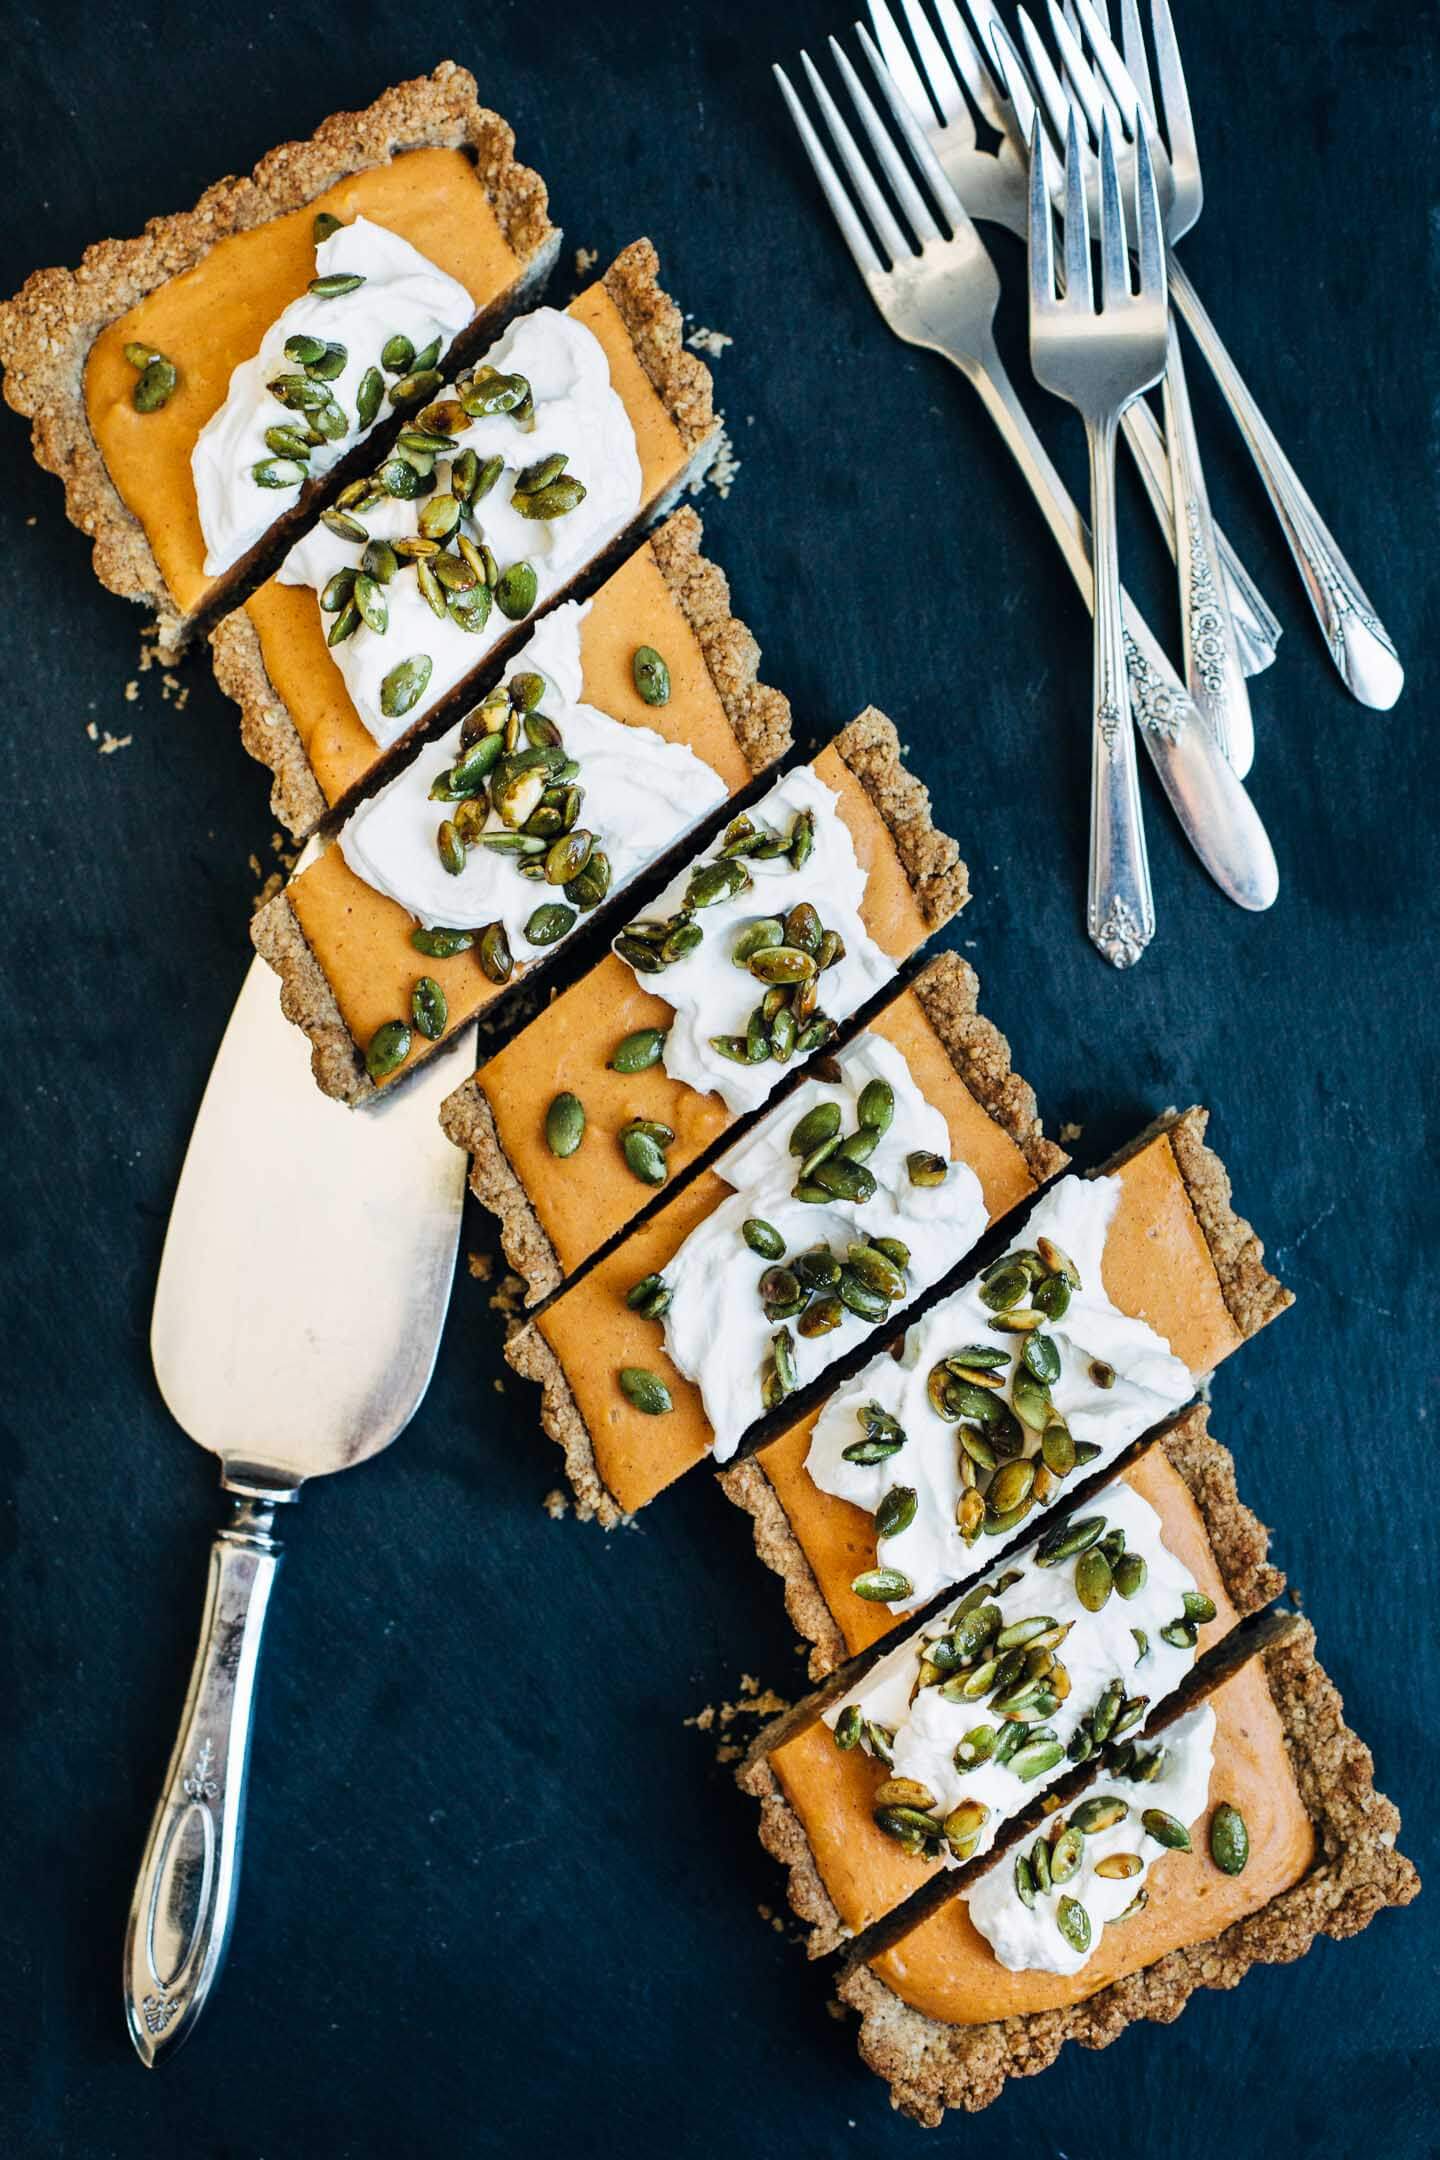 A gluten-free, vegan sweet potato tart has a silky texture with the spice and flavor of a classic sweet potato pie. It's topped with maple-sweetened coconut cream and salty-sweet toasted pepitas.